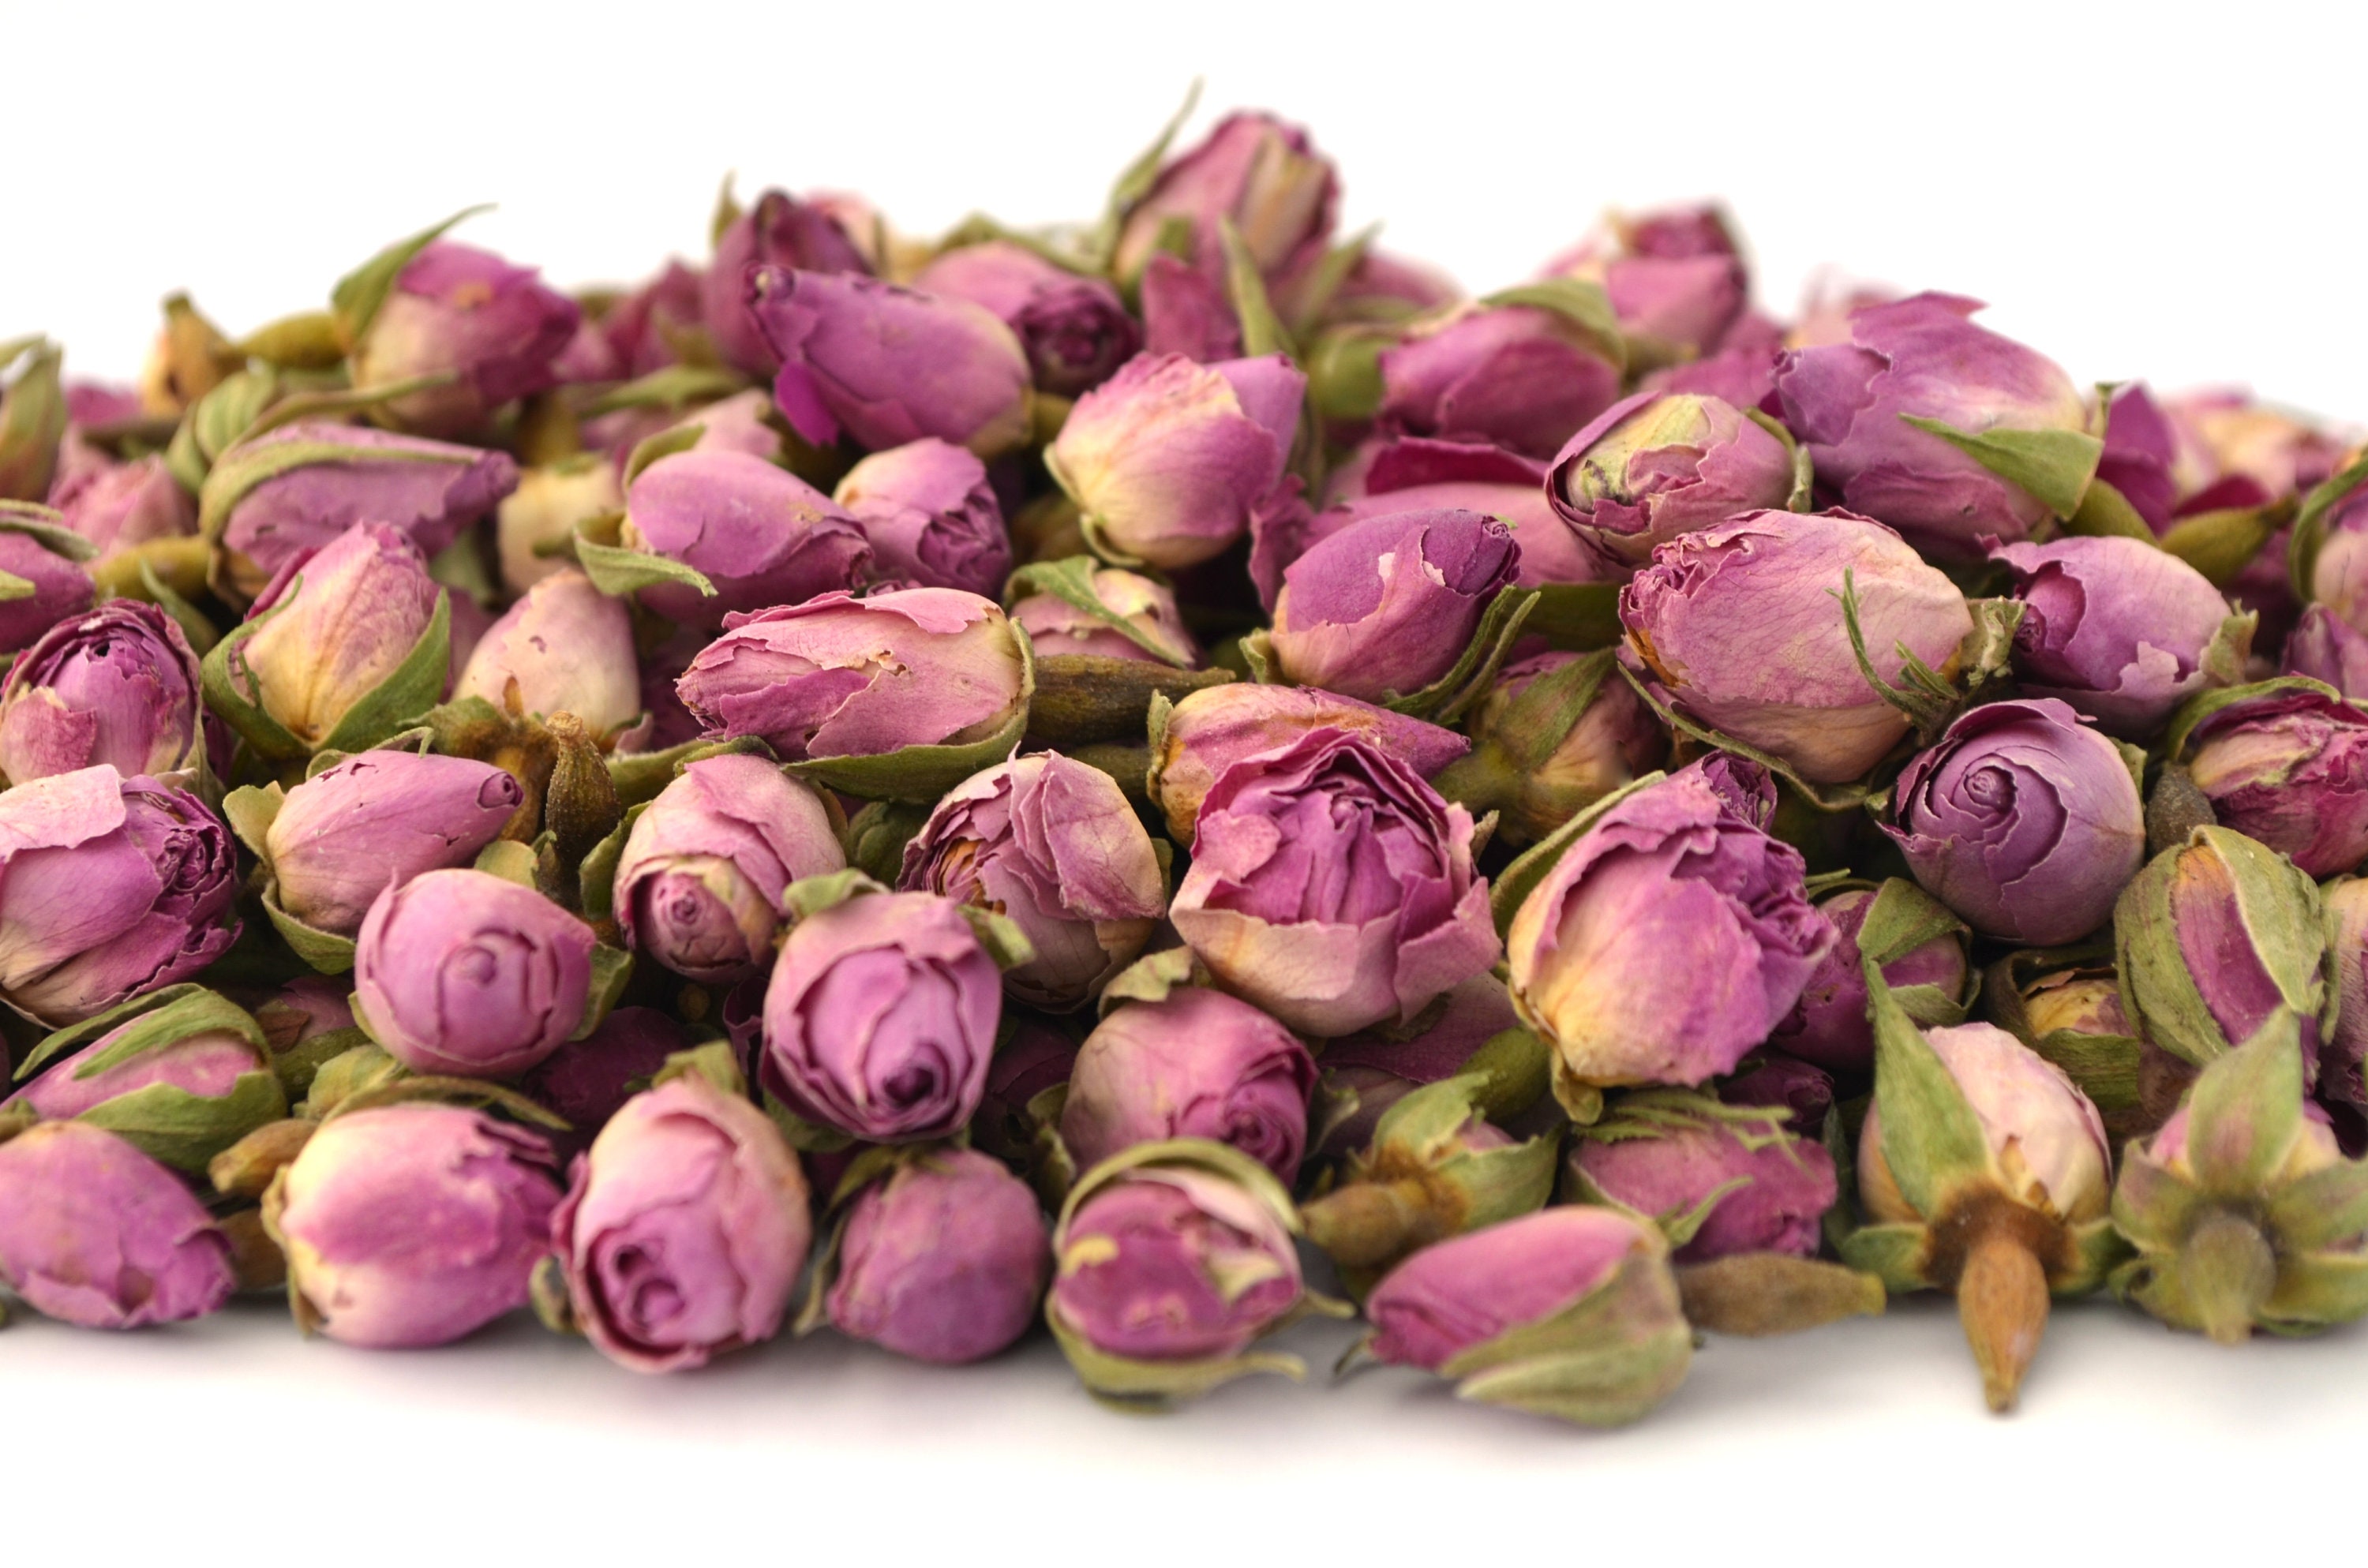 Premium Dried Rose Buds 4.5 Oz/128g,100% Pure & Natural Rose Tea.Dried Rose Petals, Edible Rose Flowers for Baking,Gift,Crafting,Wedding etc.